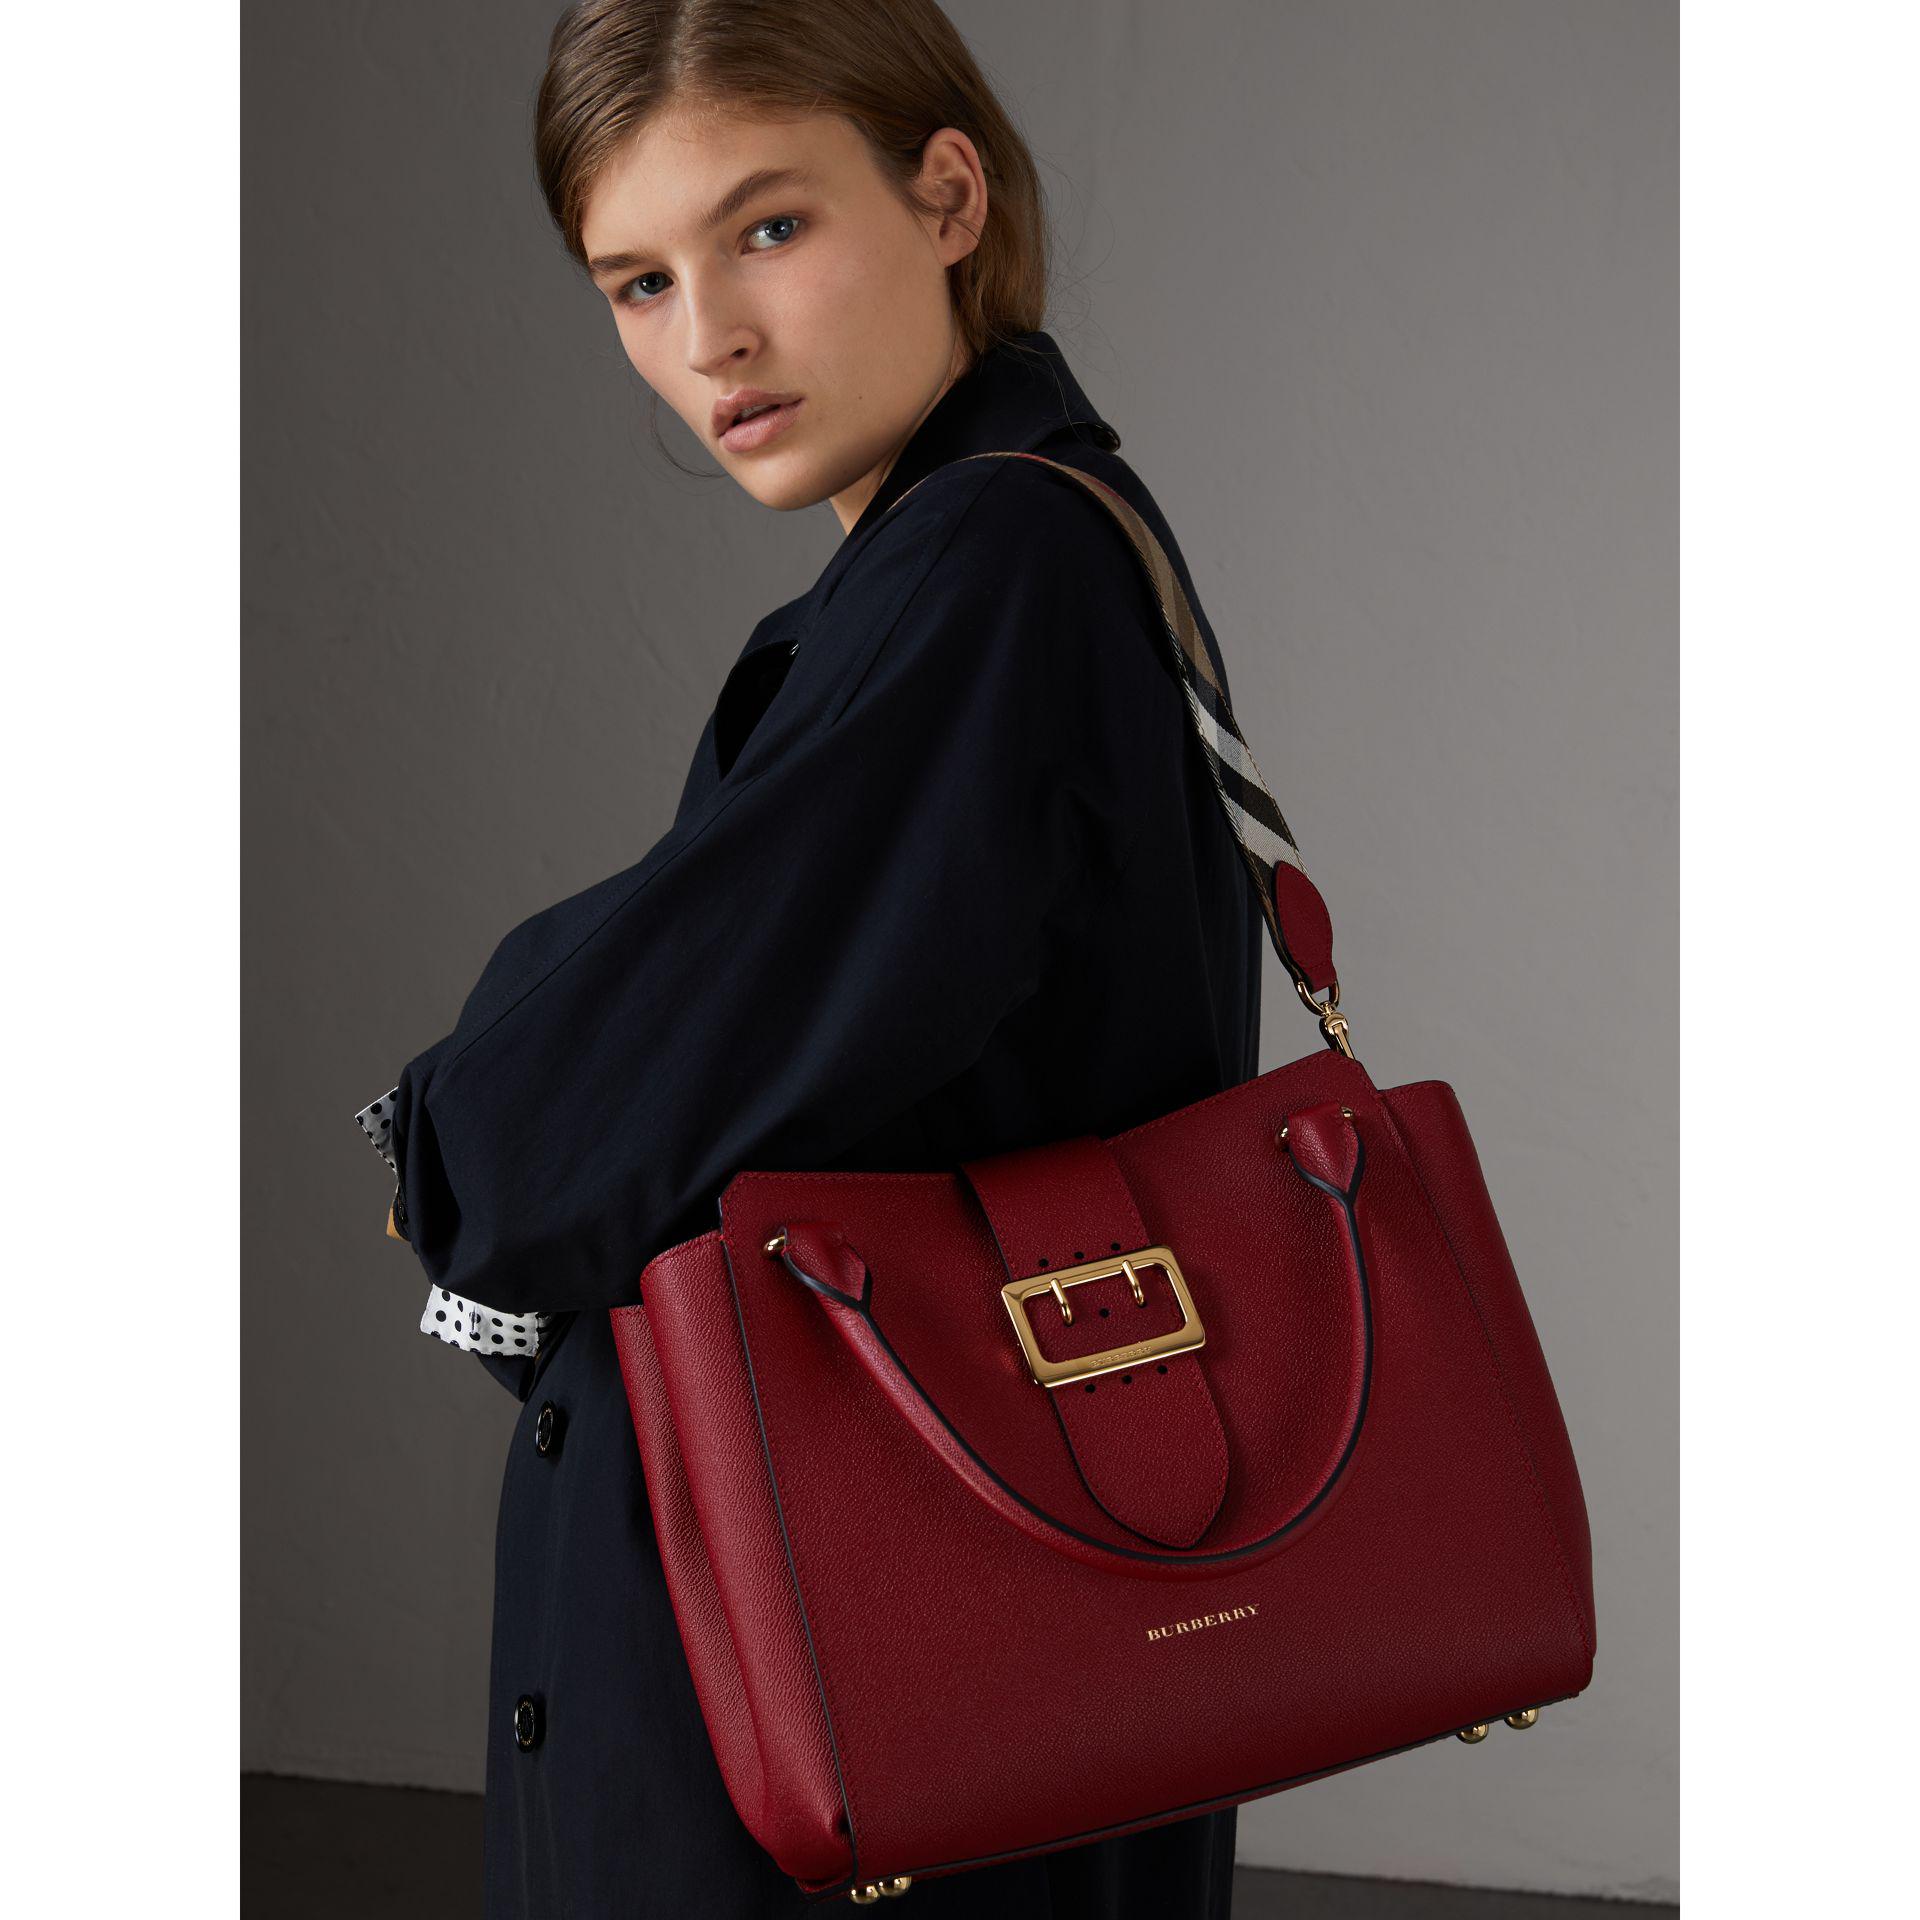 Burberry The Medium Buckle Tote In Grainy Leather Parade Red | Lyst